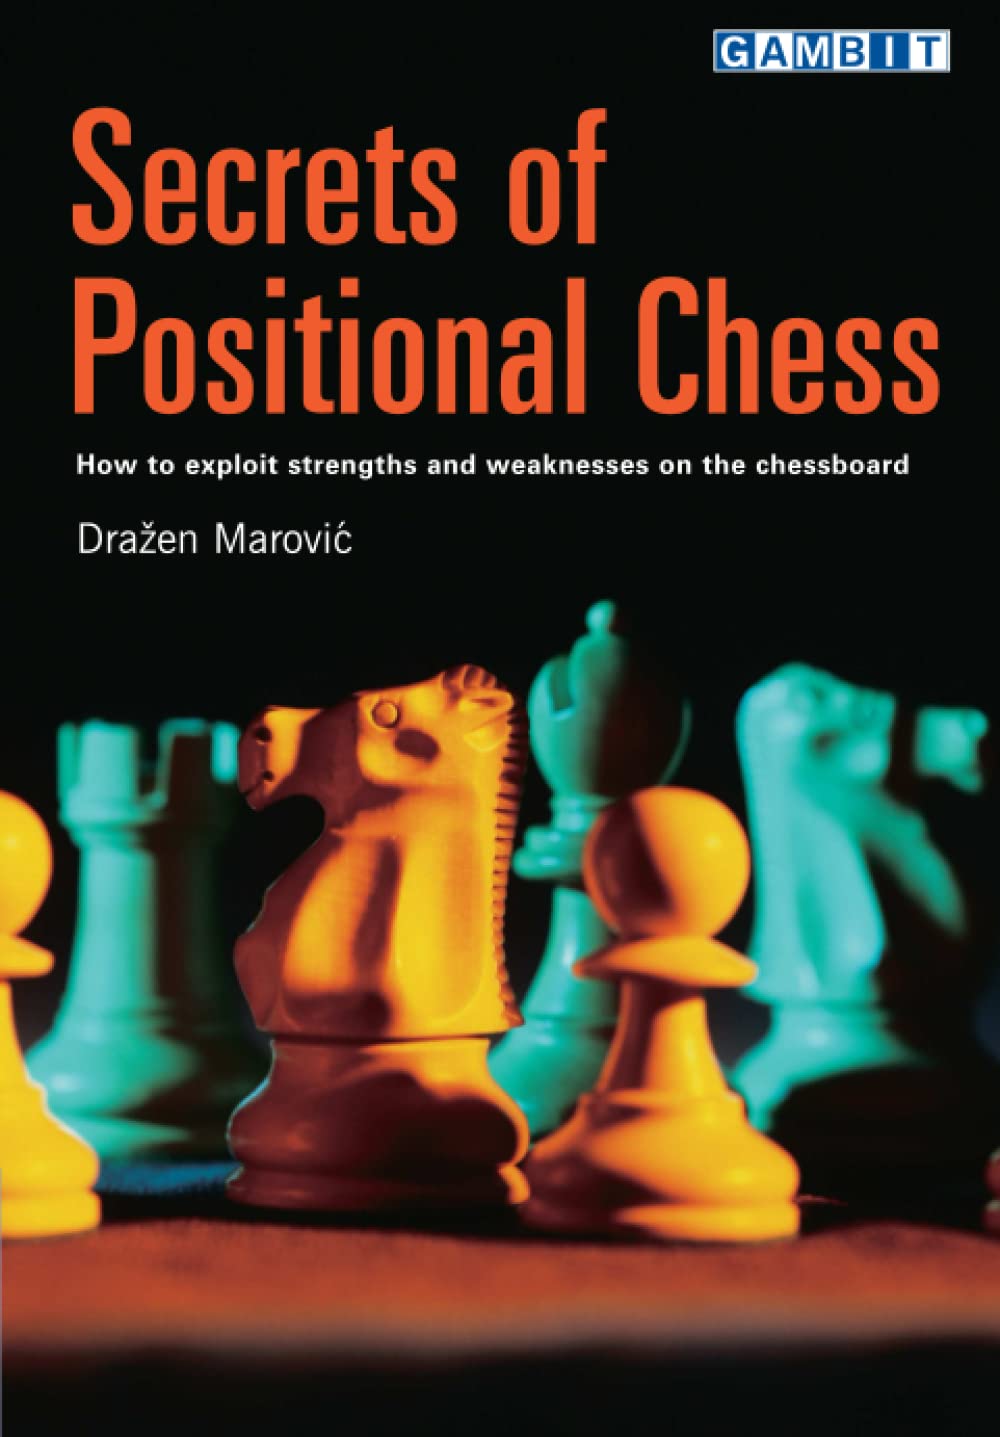 Secrets of Positional Chess